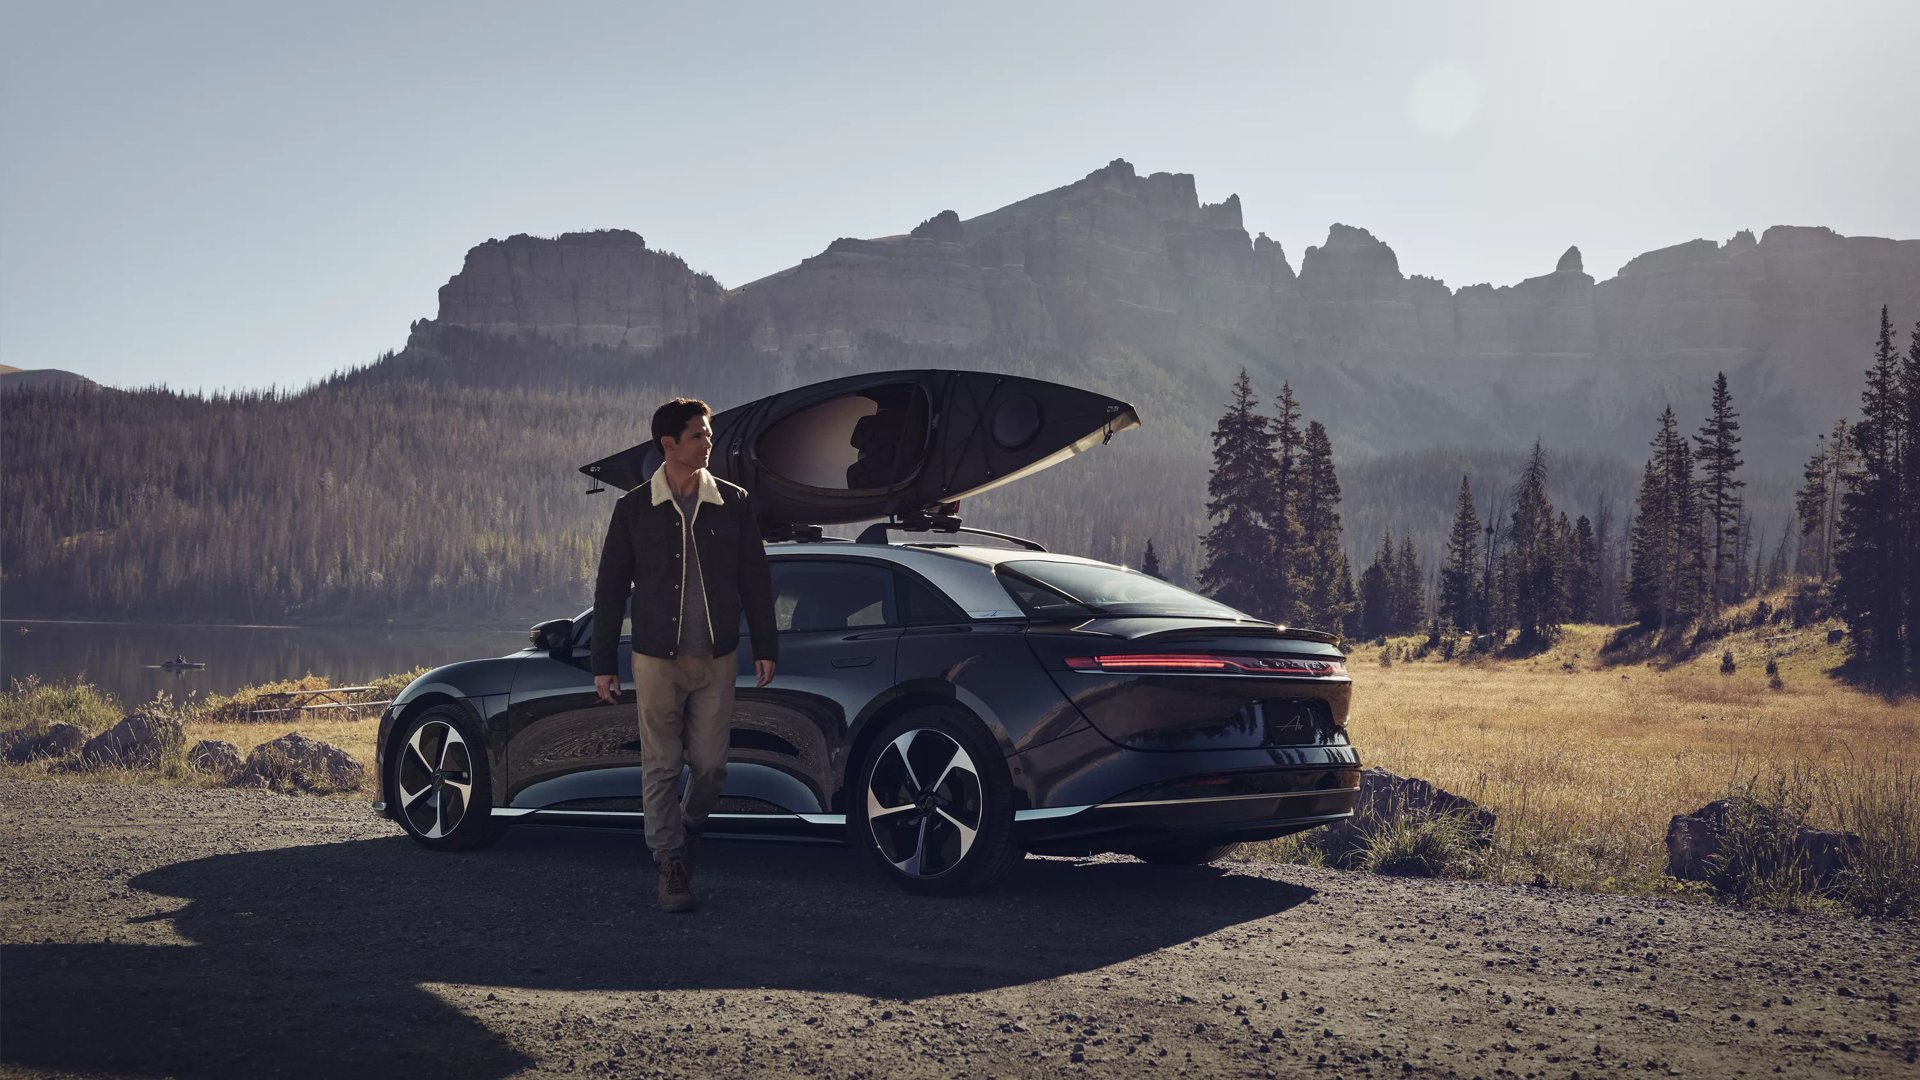 A man is walking towards the camera in front of a Infinite Black Metallic Lucid Air Pure. The Lucid Air is equipped with a roof carrier on which a cannoe is loaded. The background shows a lake, trees, and tall, rocky moutains.